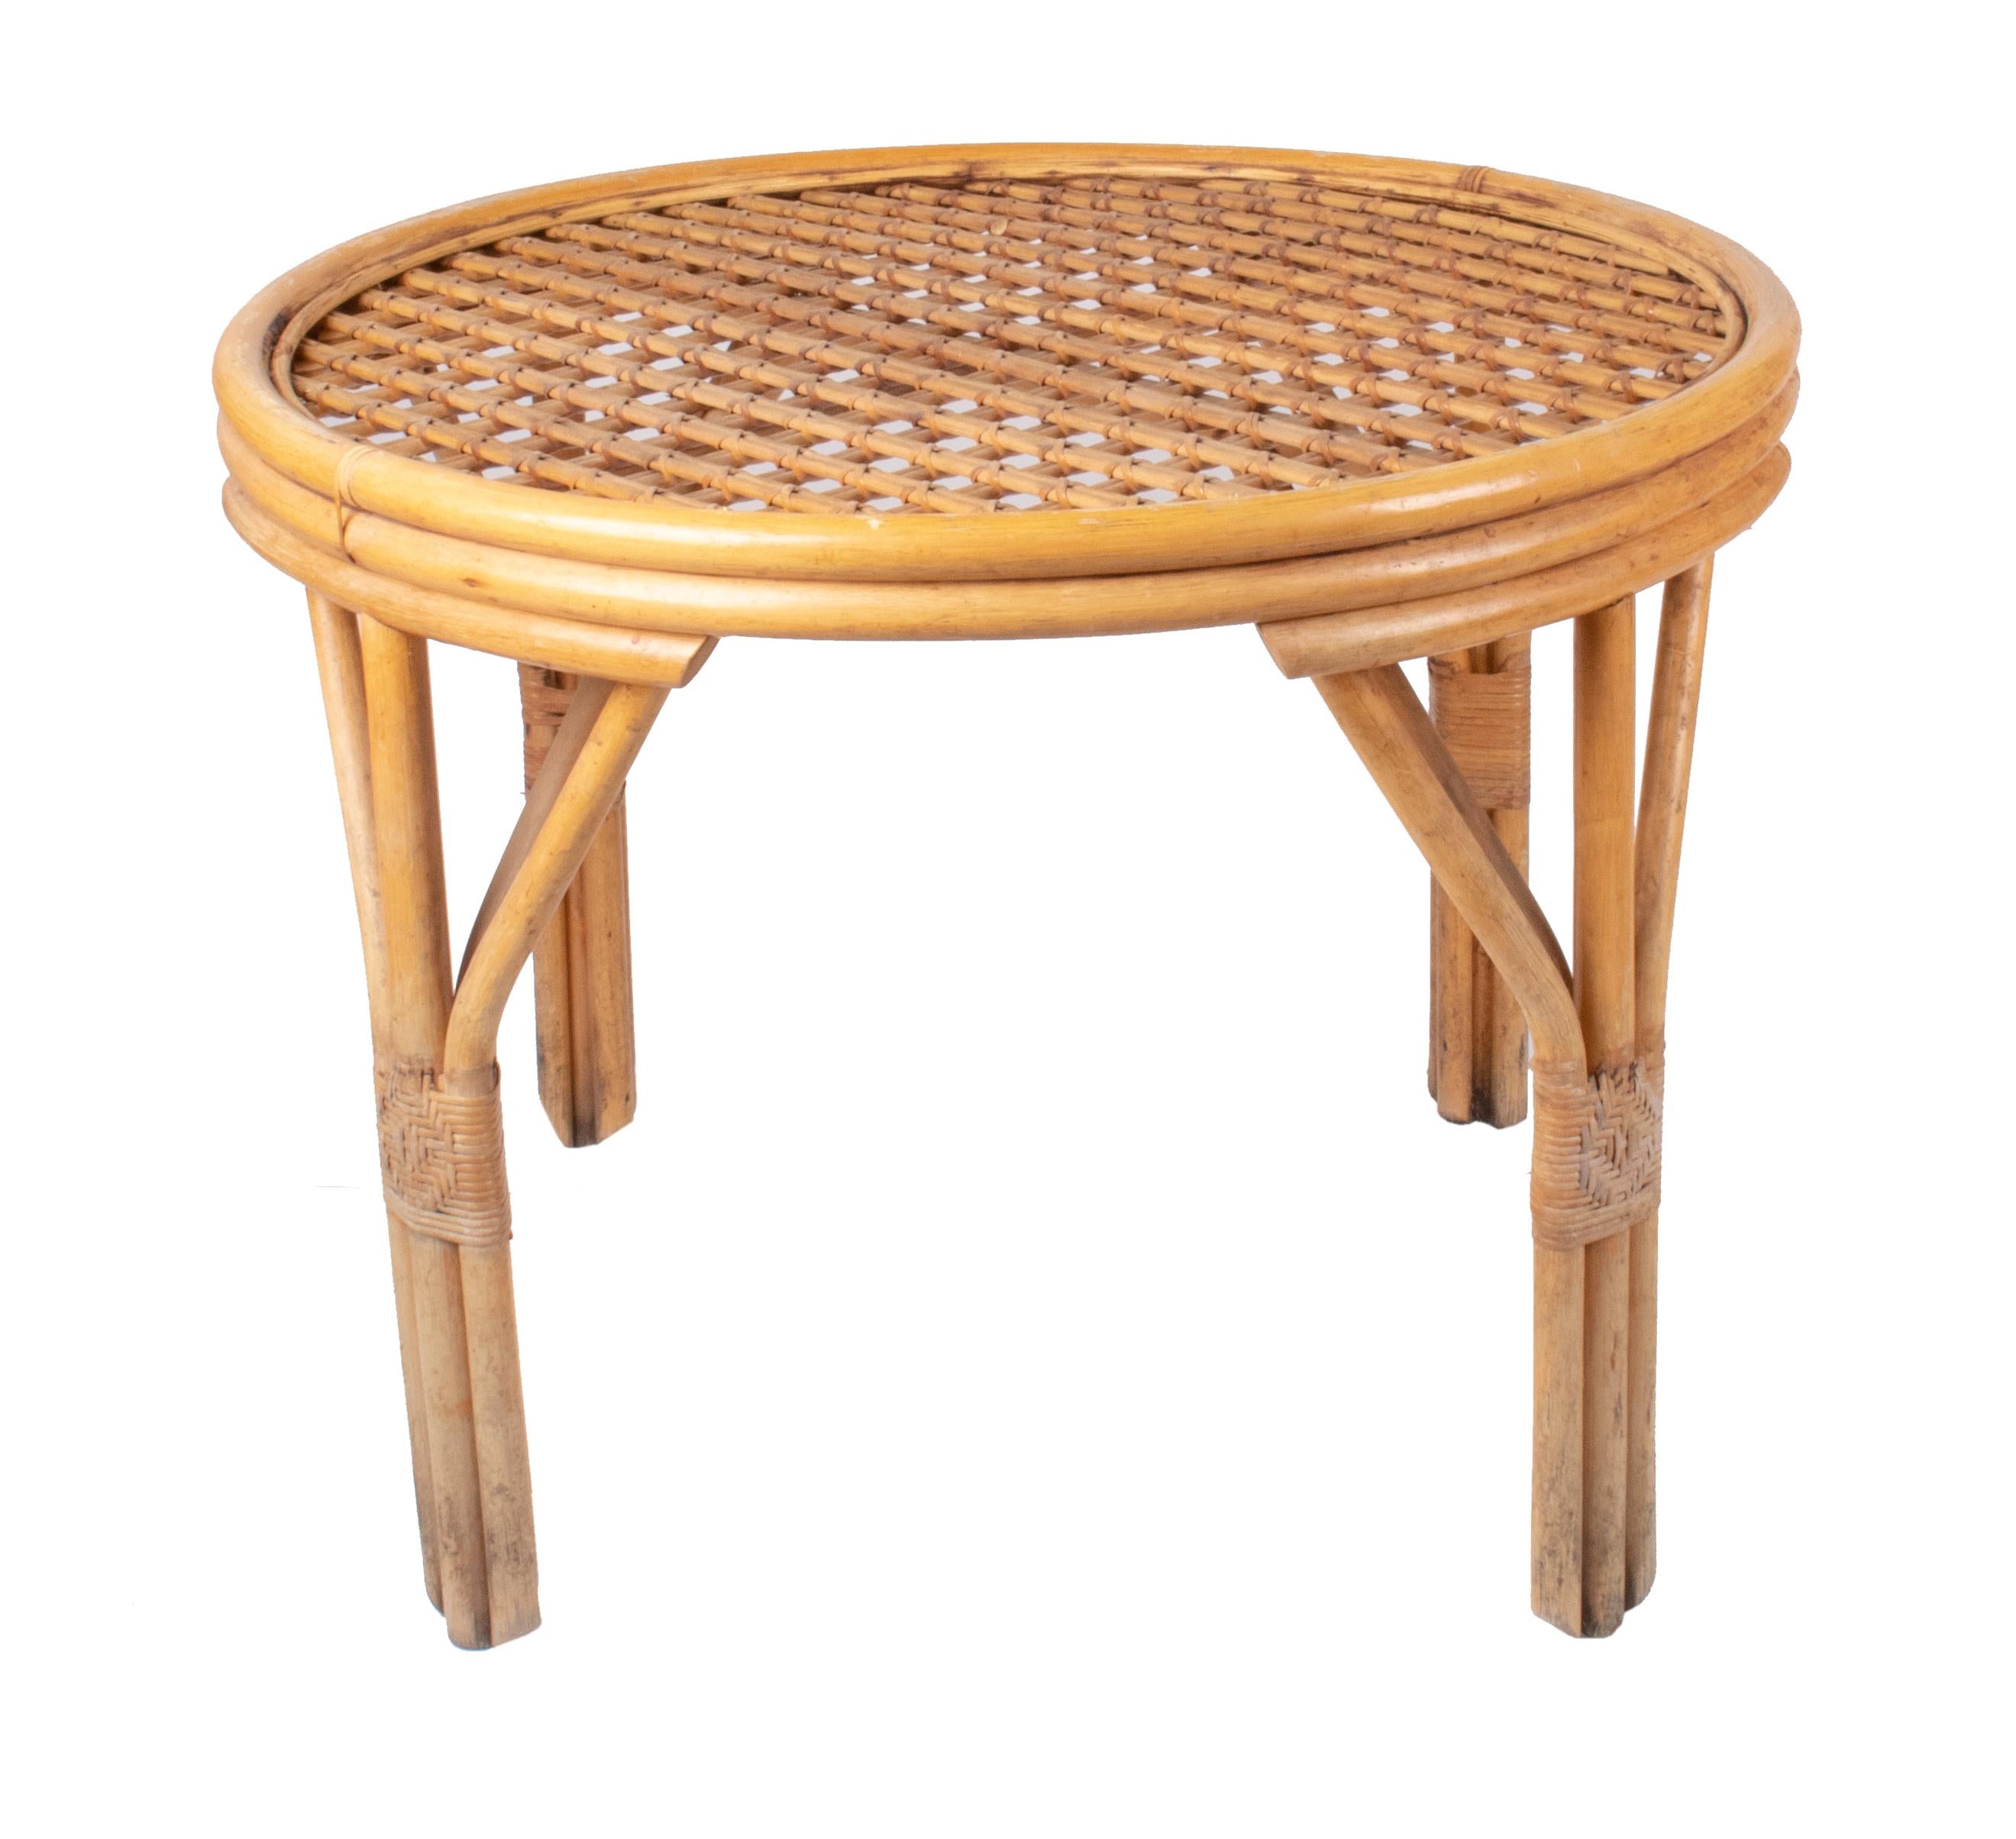 1980s Spanish bamboo and wicker round table.